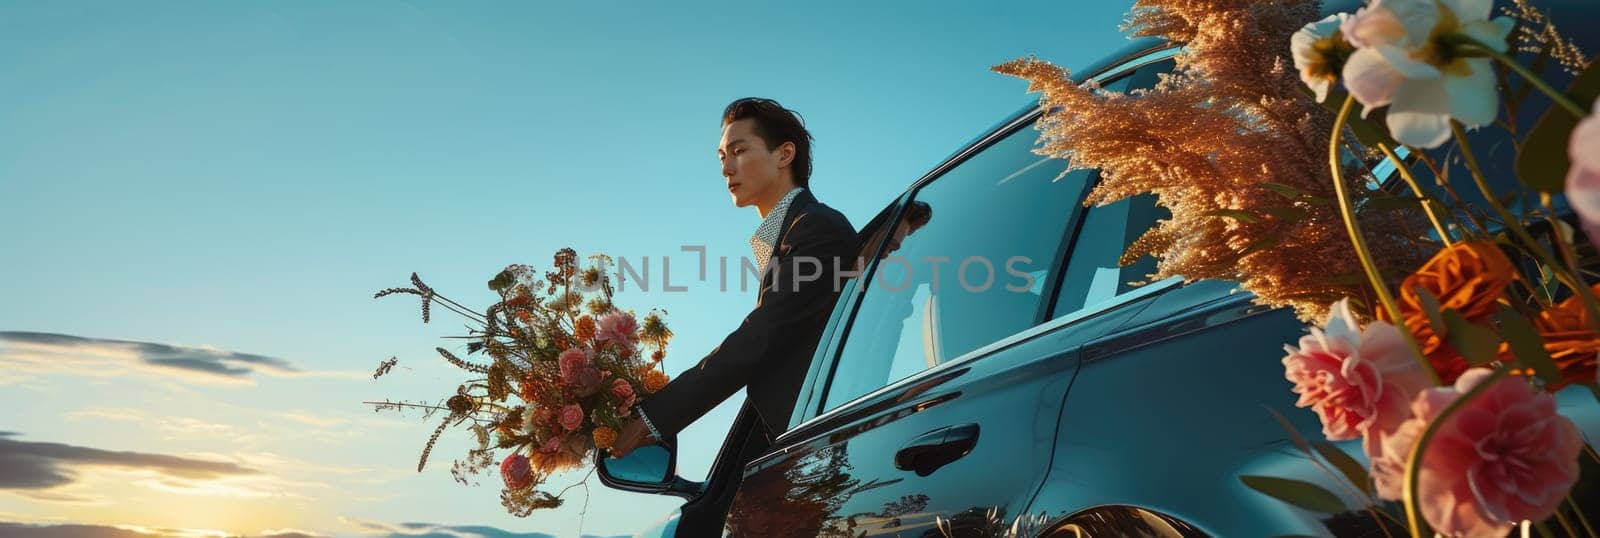 A man stands beside a blue car, holding a bouquet of flowers in his hand.